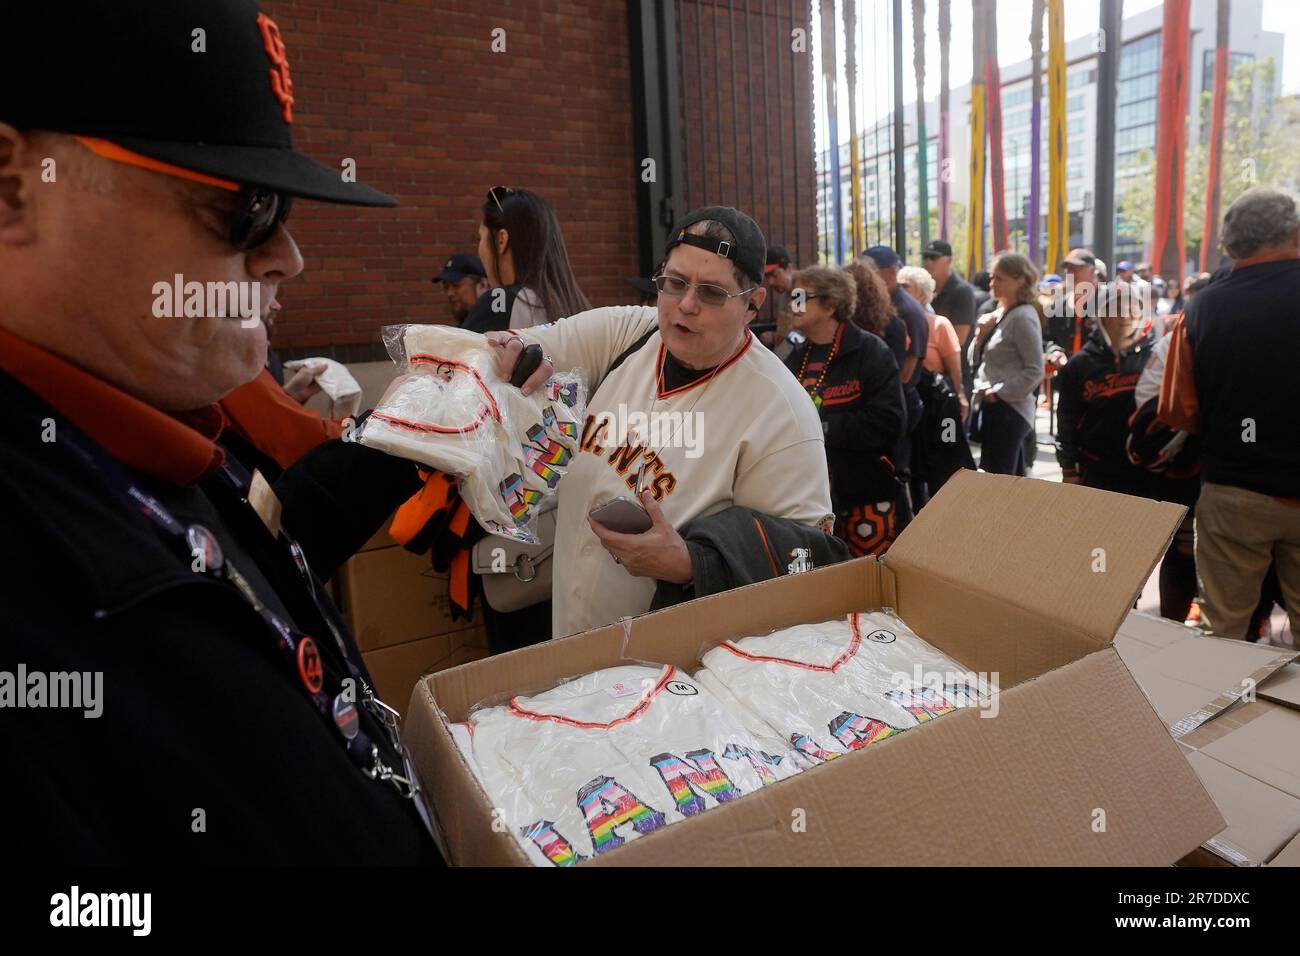 Fans receive San Francisco Giants Pride Jerseys as part of the team's Pride  Day promotional giveaway as they enter Oracle Park before a baseball game  between the Giants and the Chicago Cubs